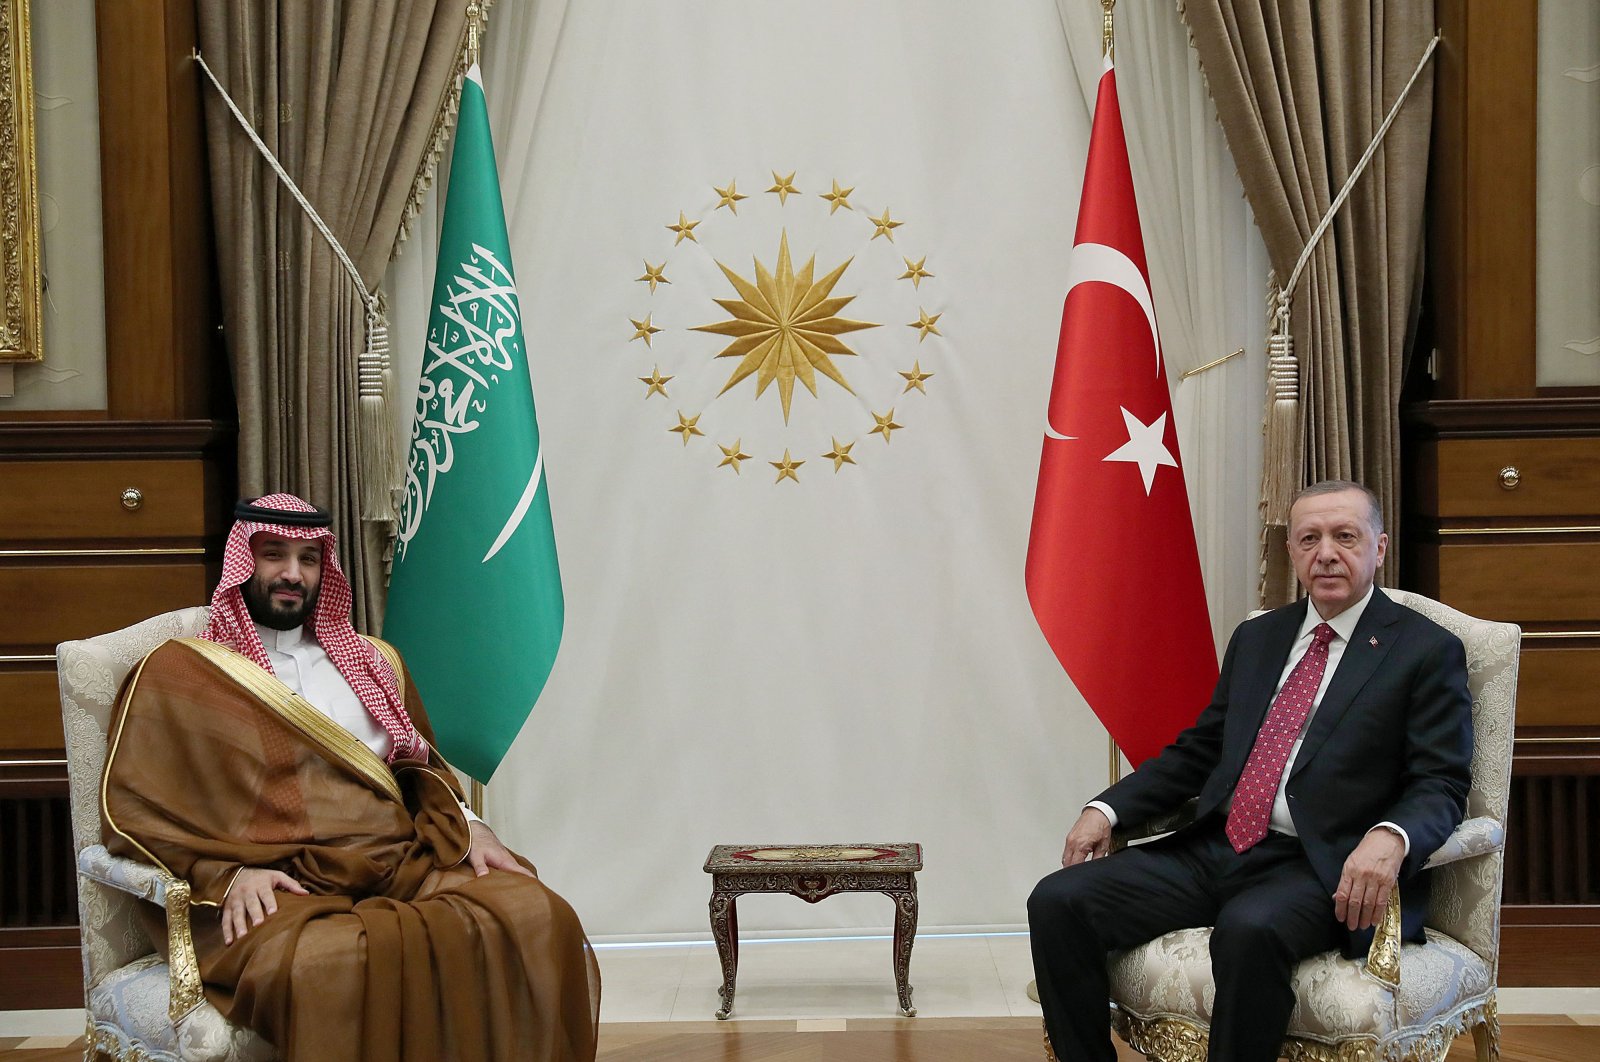 President Recep Tayyip Erdoğan receives Crown Prince of Saudi Arabia Mohammed bin Salman during an official ceremony at the Presidential Complex in the capital Ankara, Turkey, June 22, 2022. (AFP Photo)